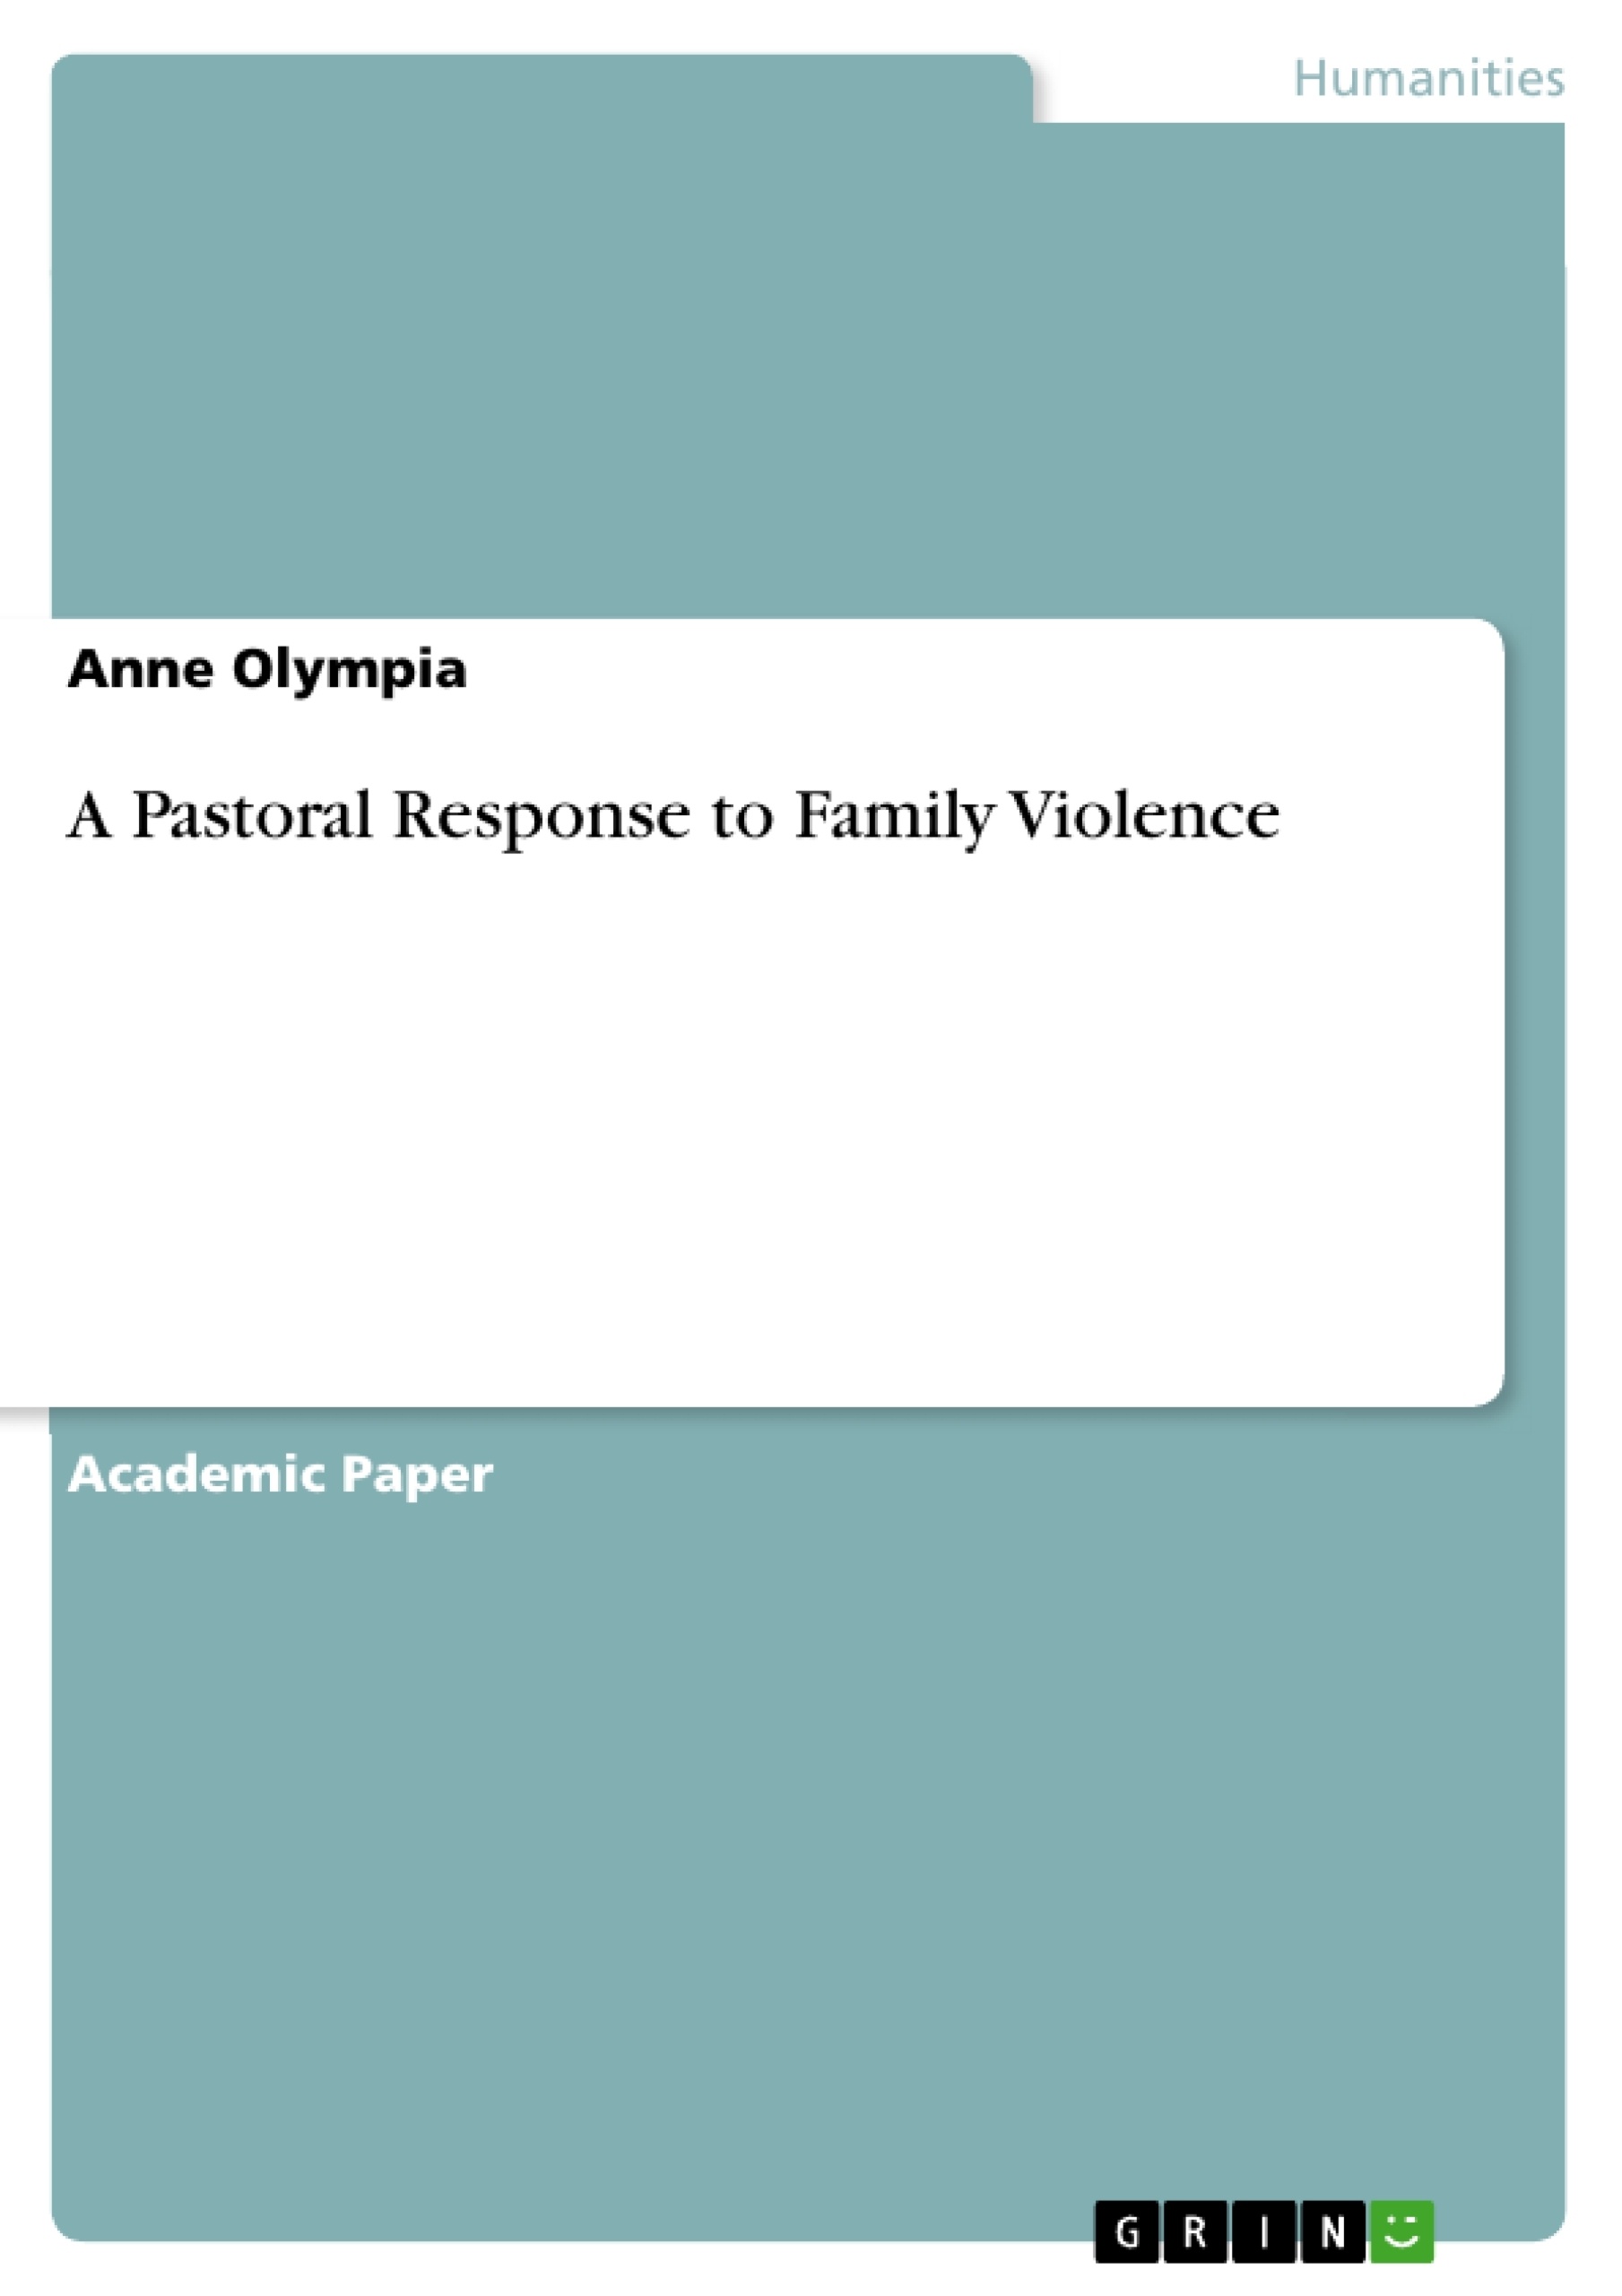 Title: A Pastoral Response to Family Violence